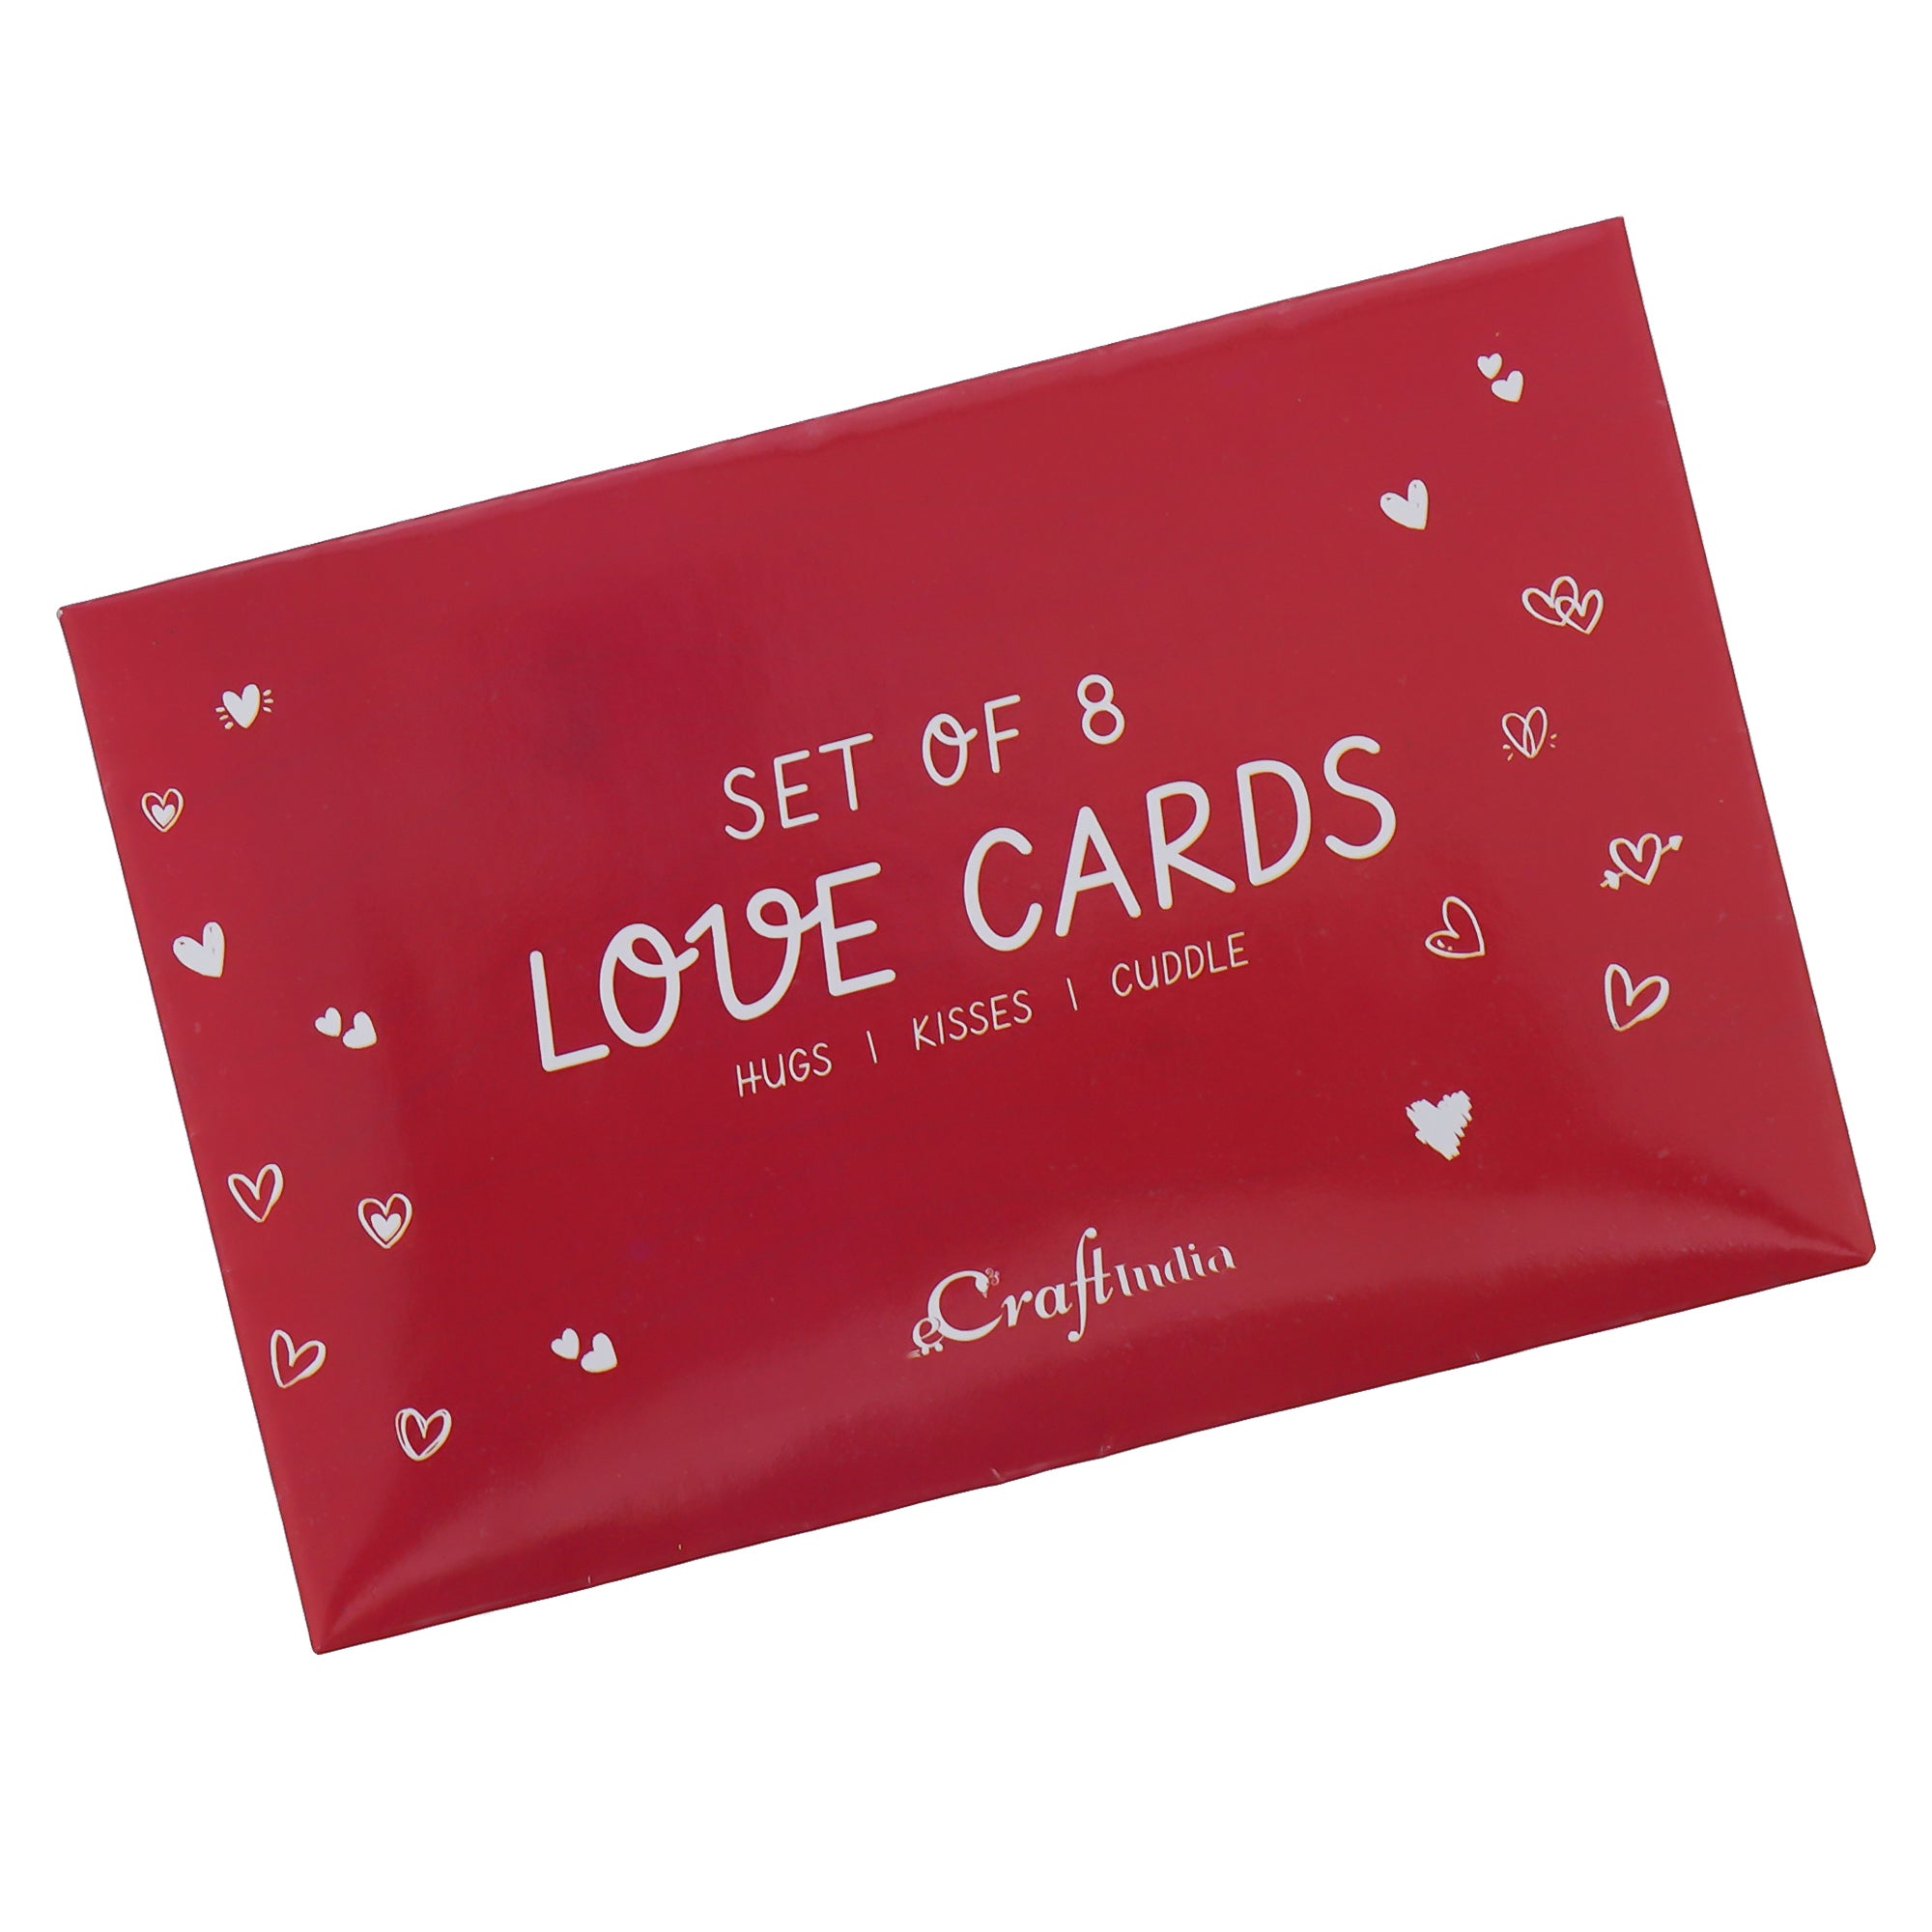 Valentine Combo of Pack of 8 Love Gift Cards, "20 Reasons Why I Love You" Printed on Little Red Hearts Decorative Wooden Gift Set Box 5